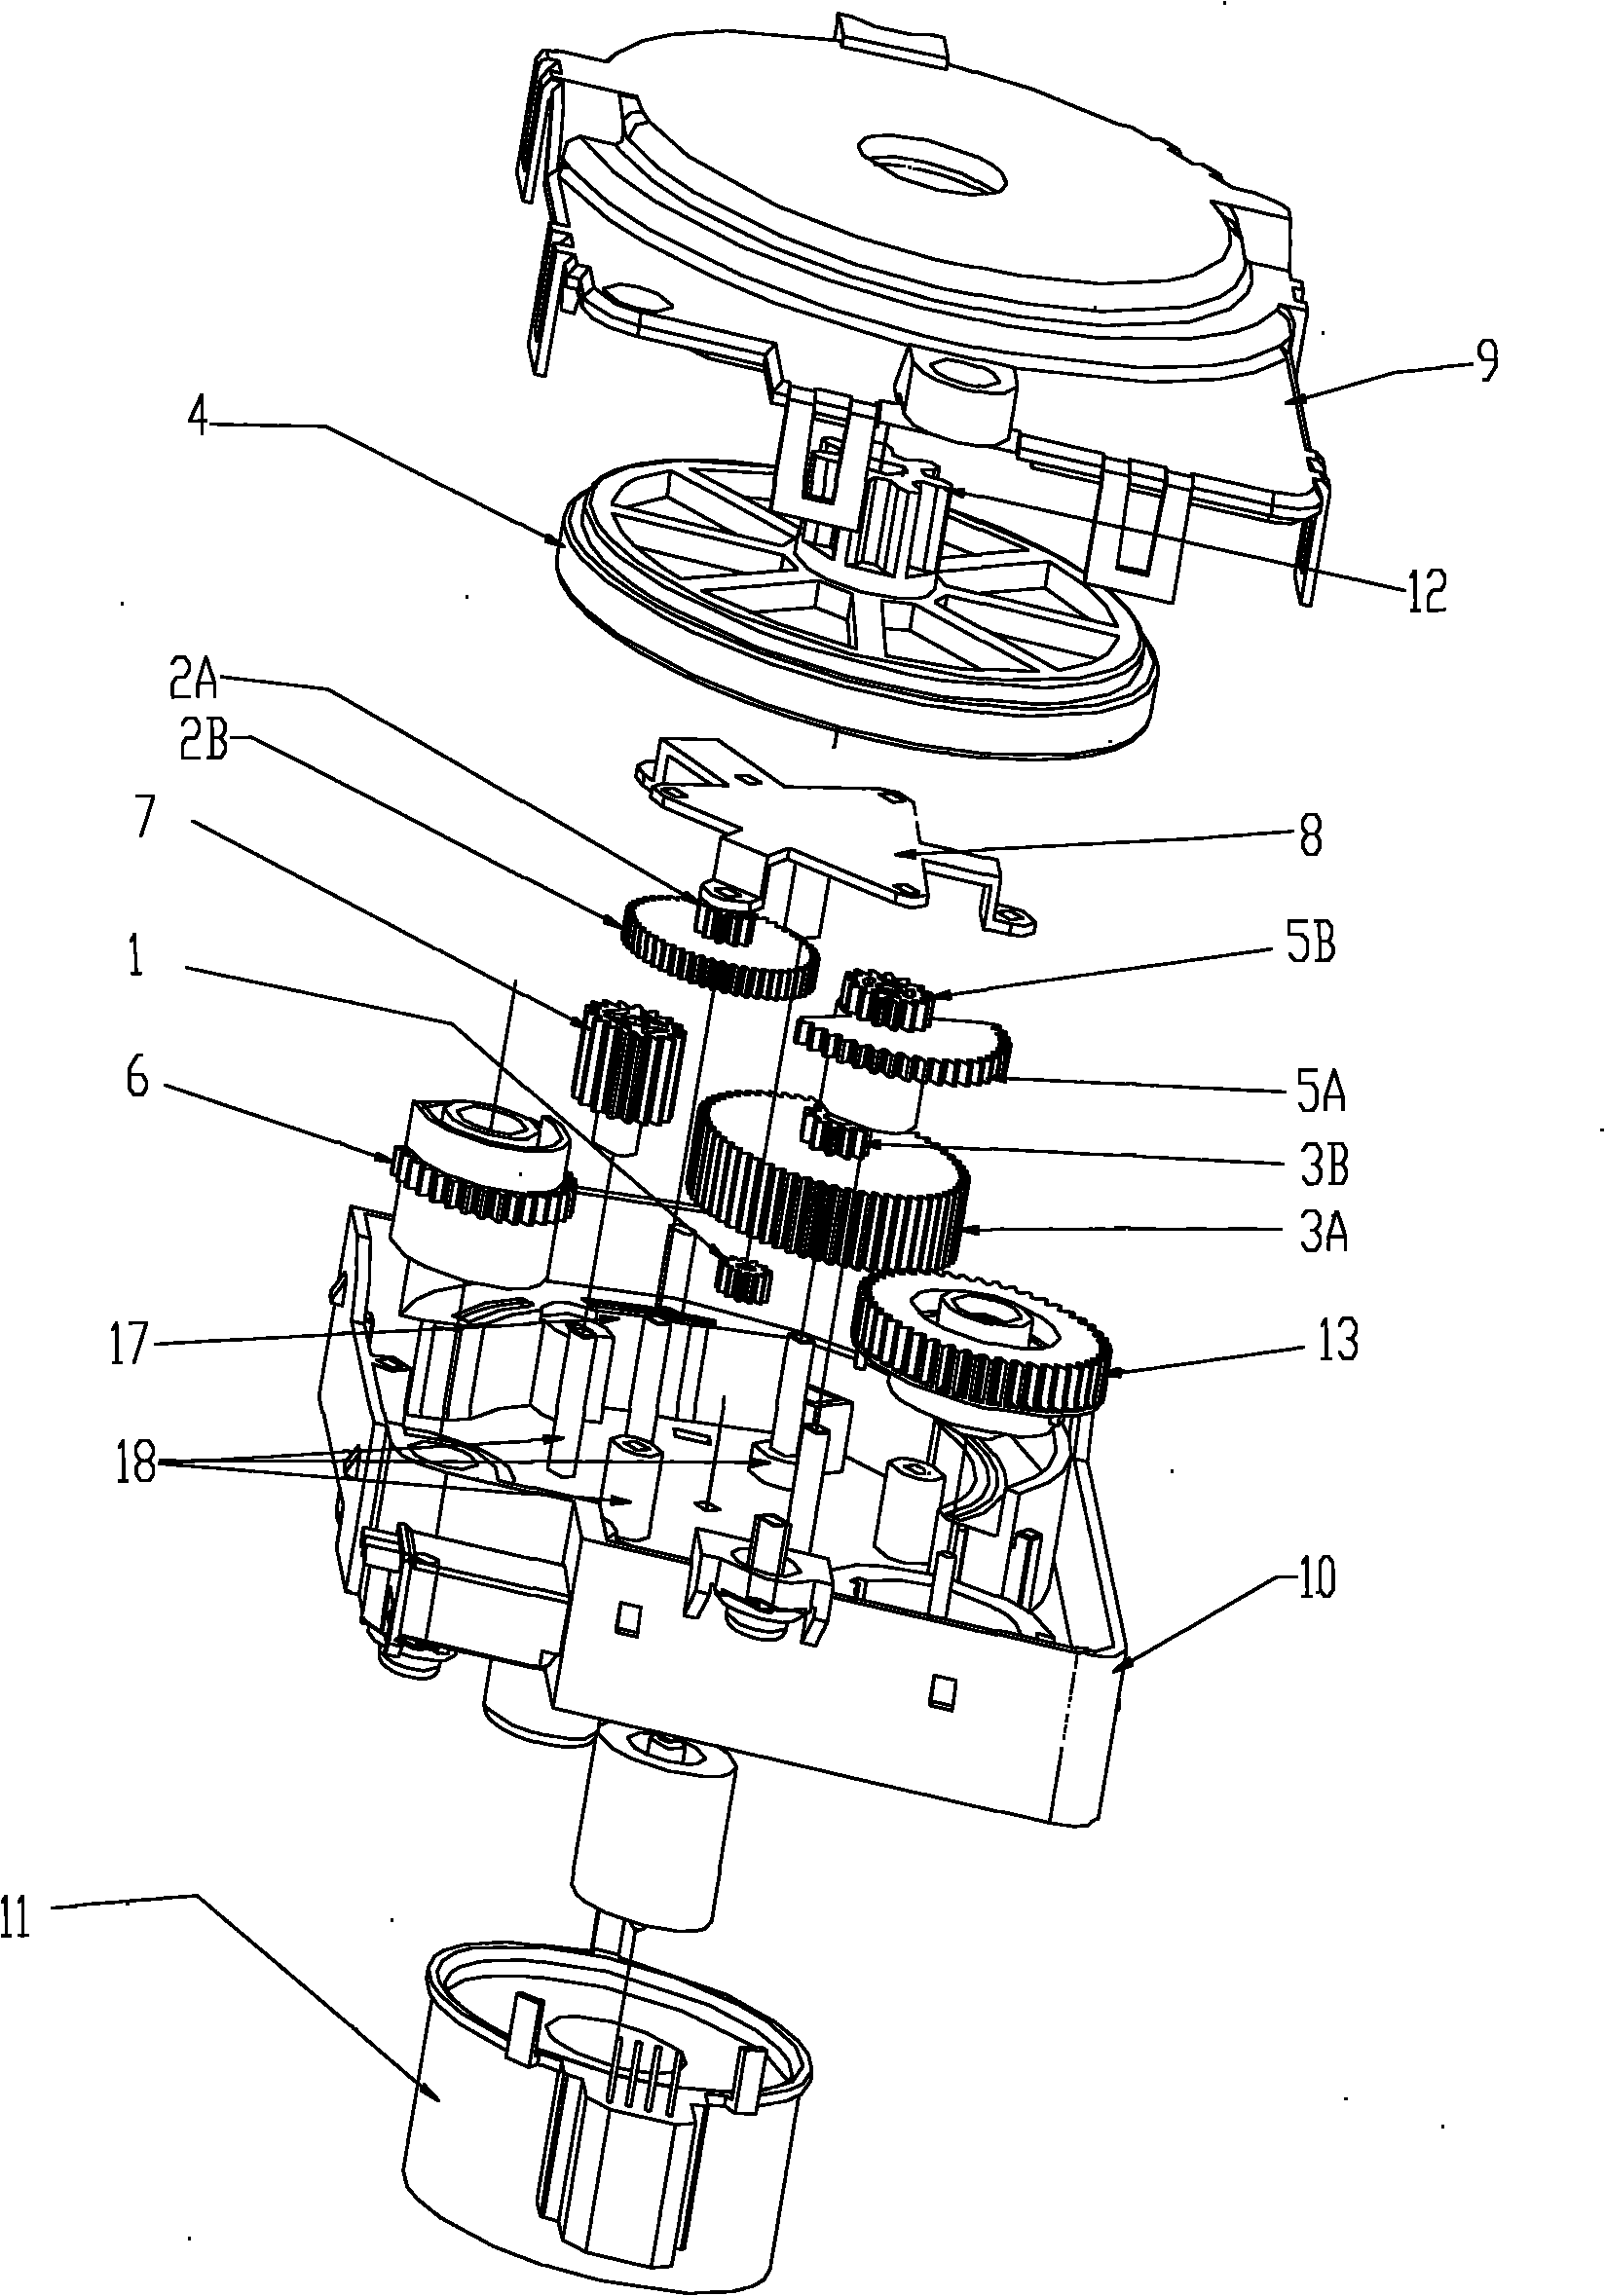 Steering drive device for automobile headlight